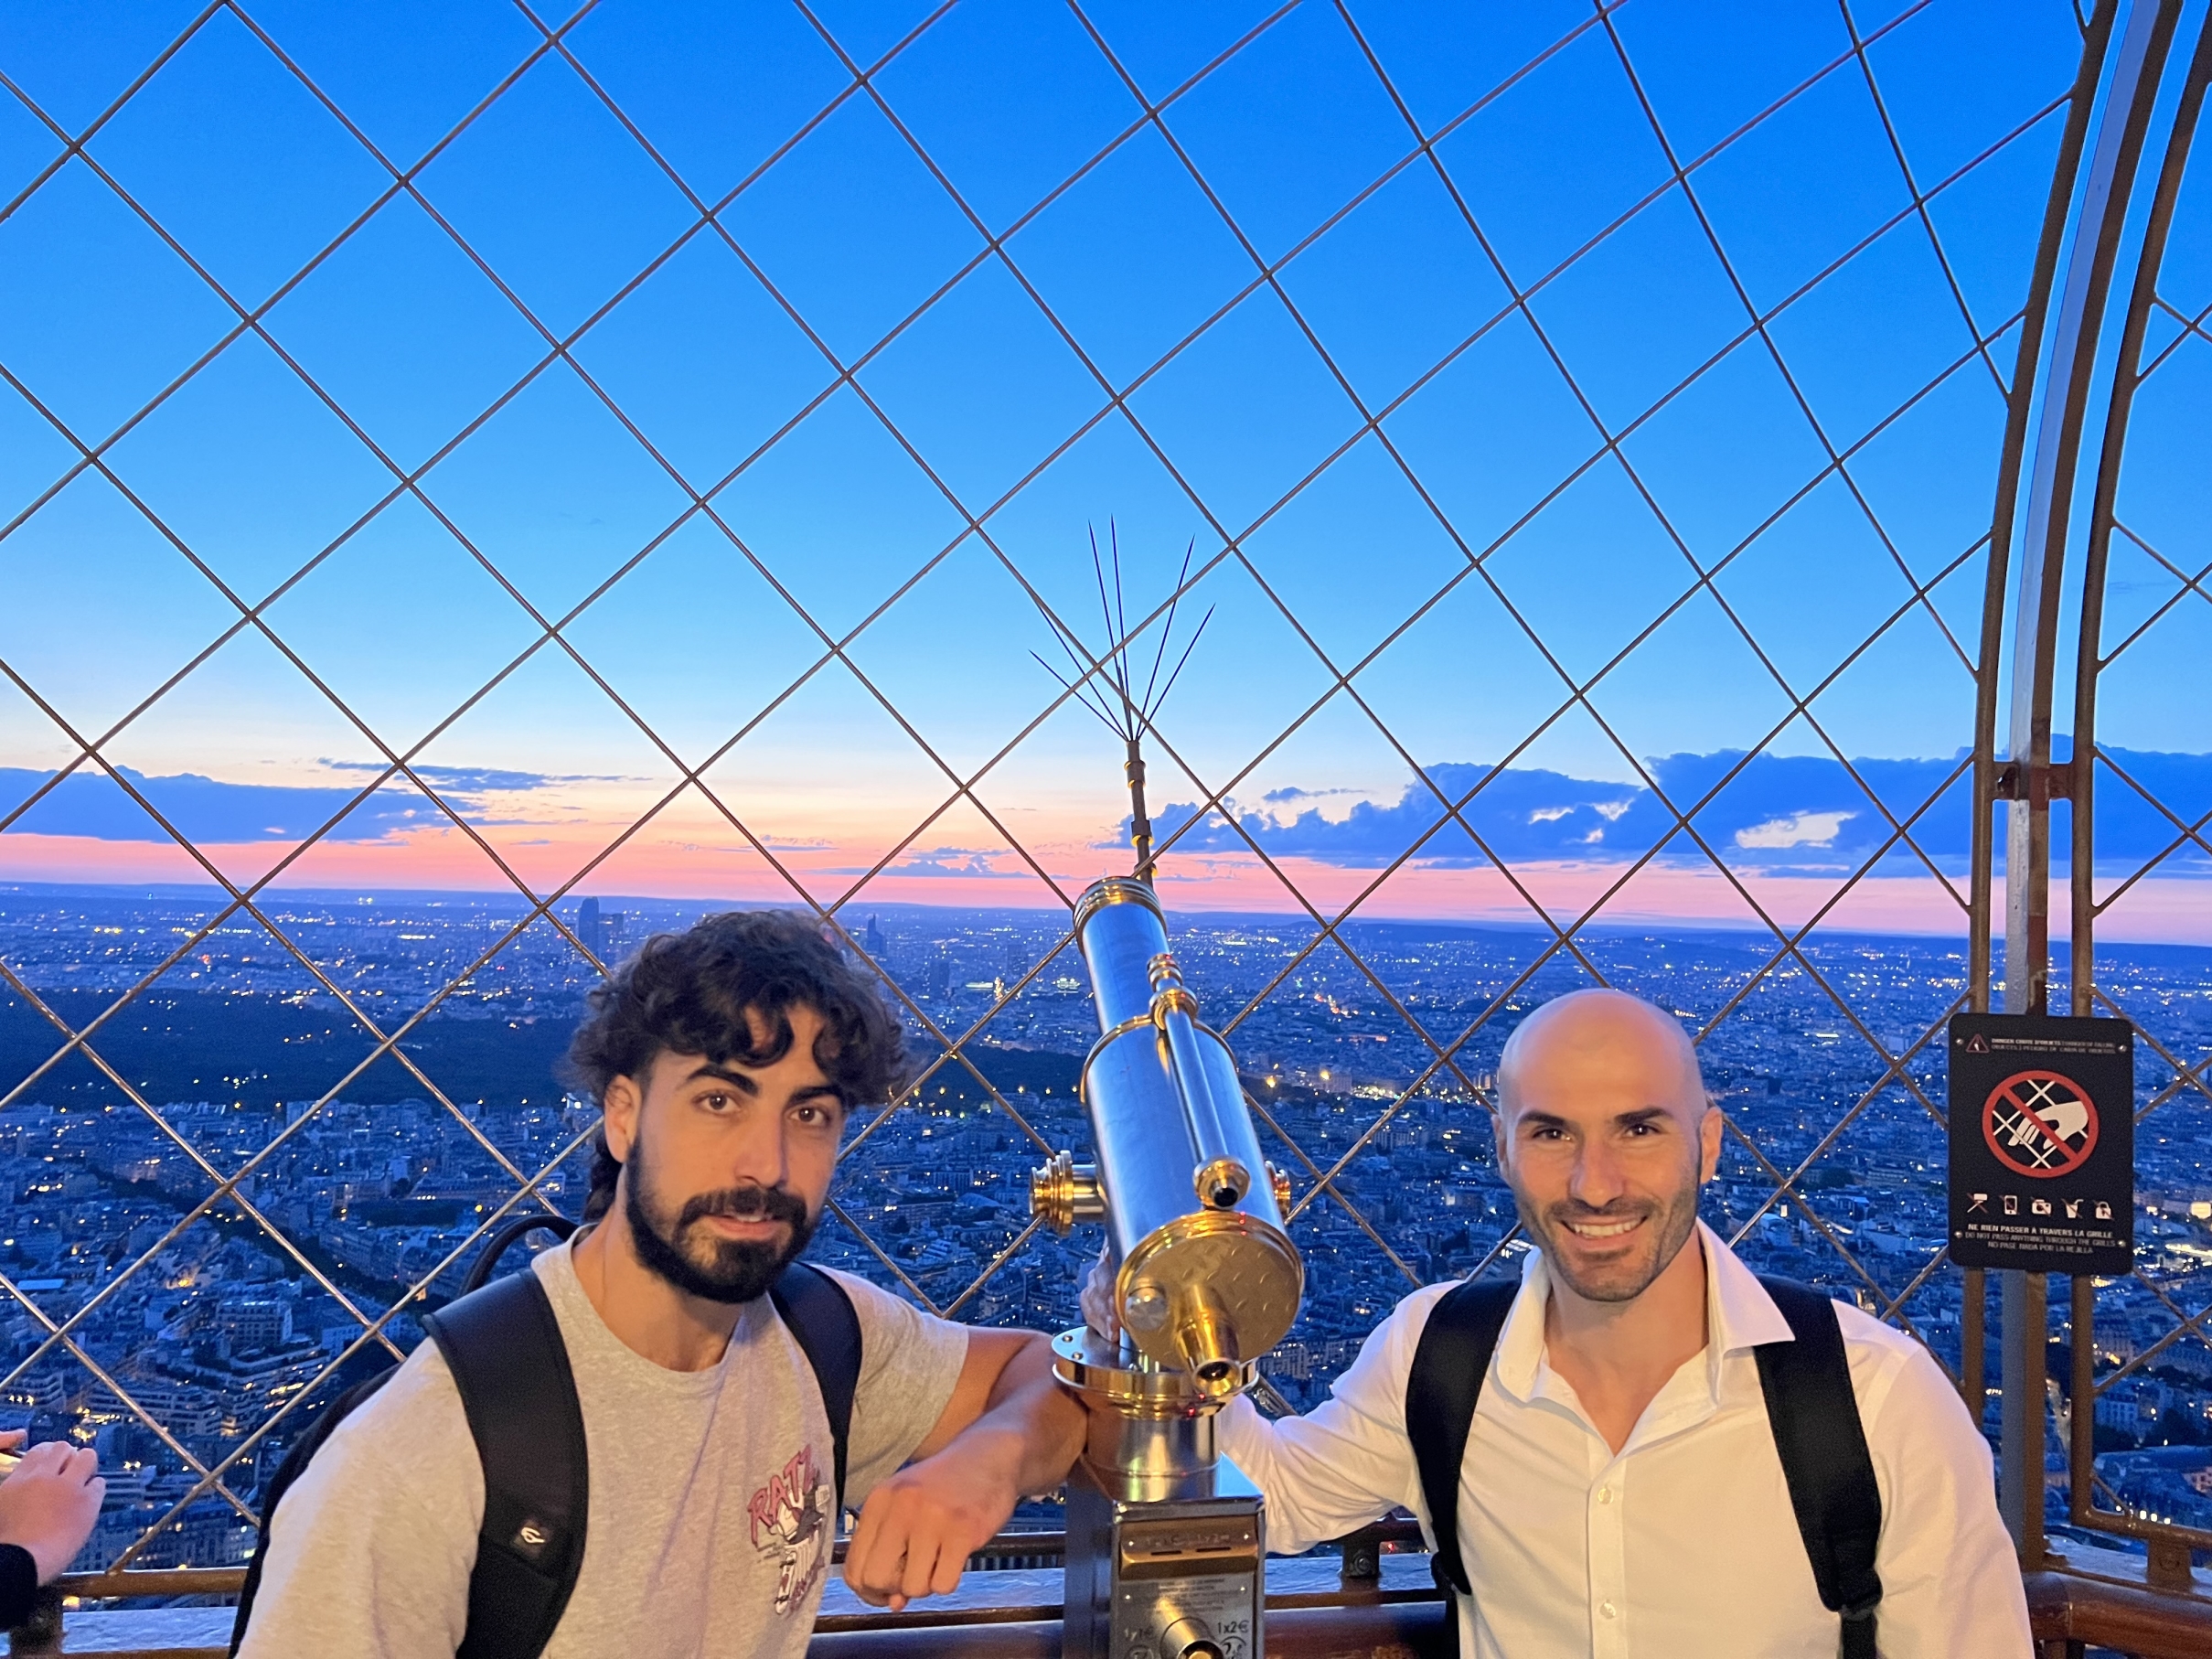 On the top of the Eiffel Tower in France